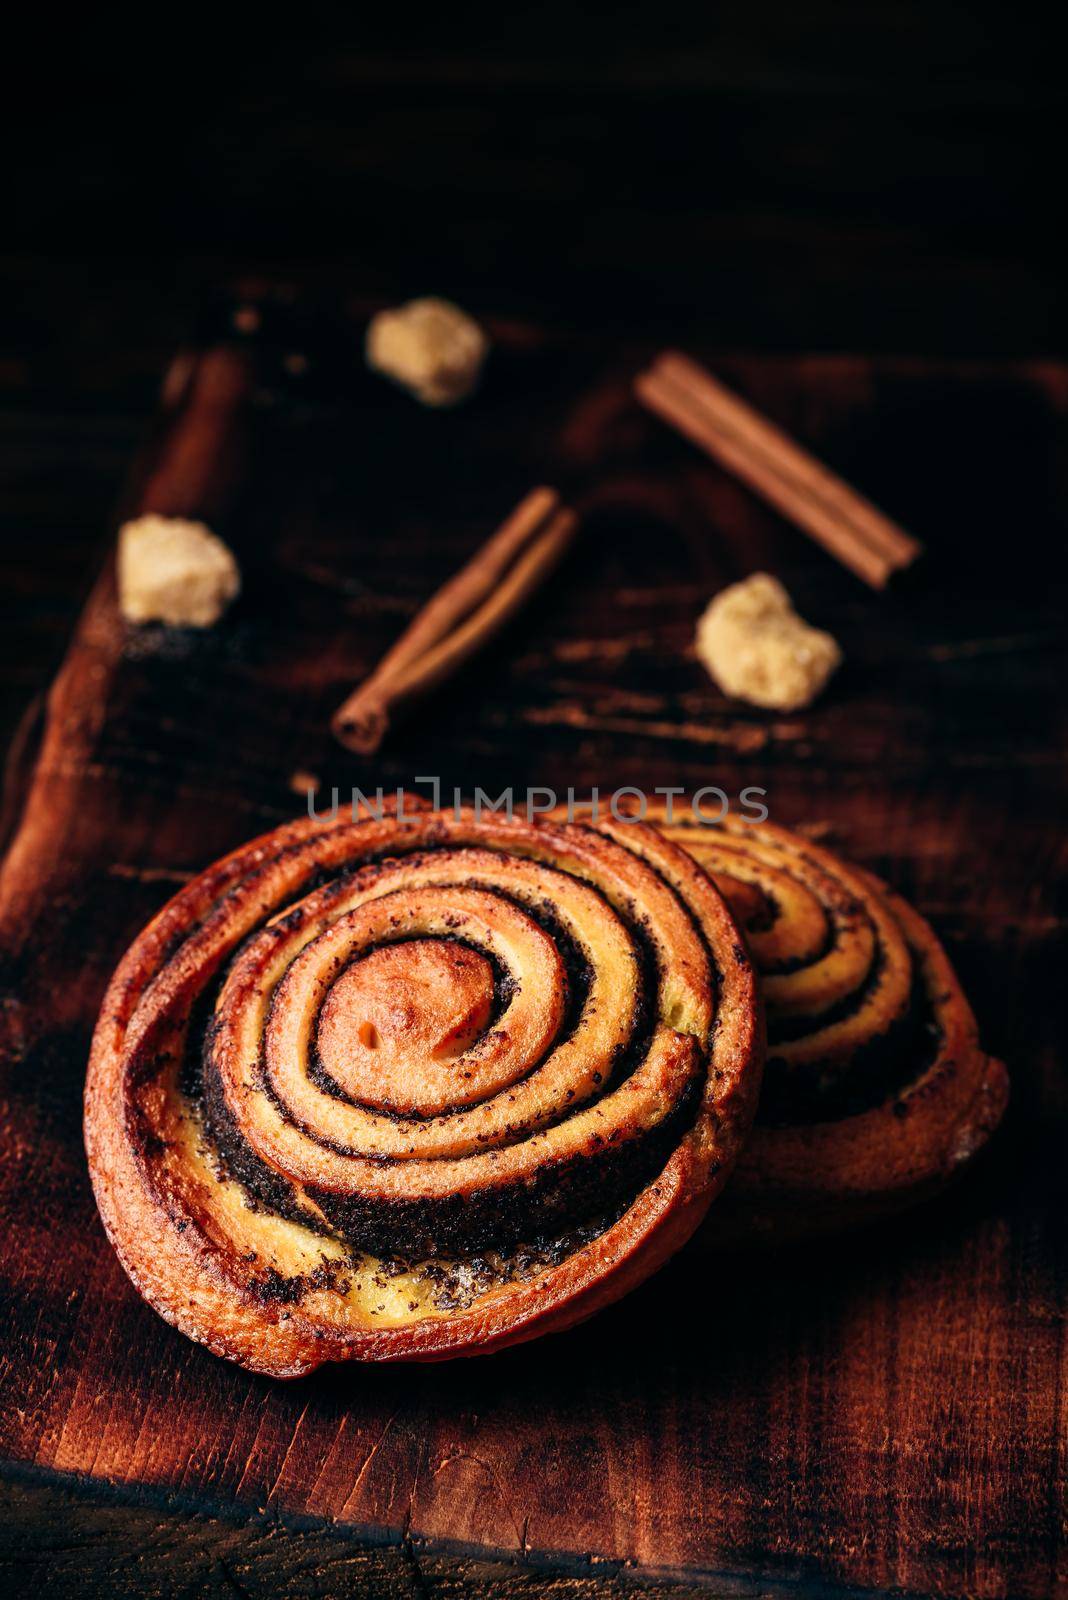 Sweet roll with poppy seeds on rustic wooden surface